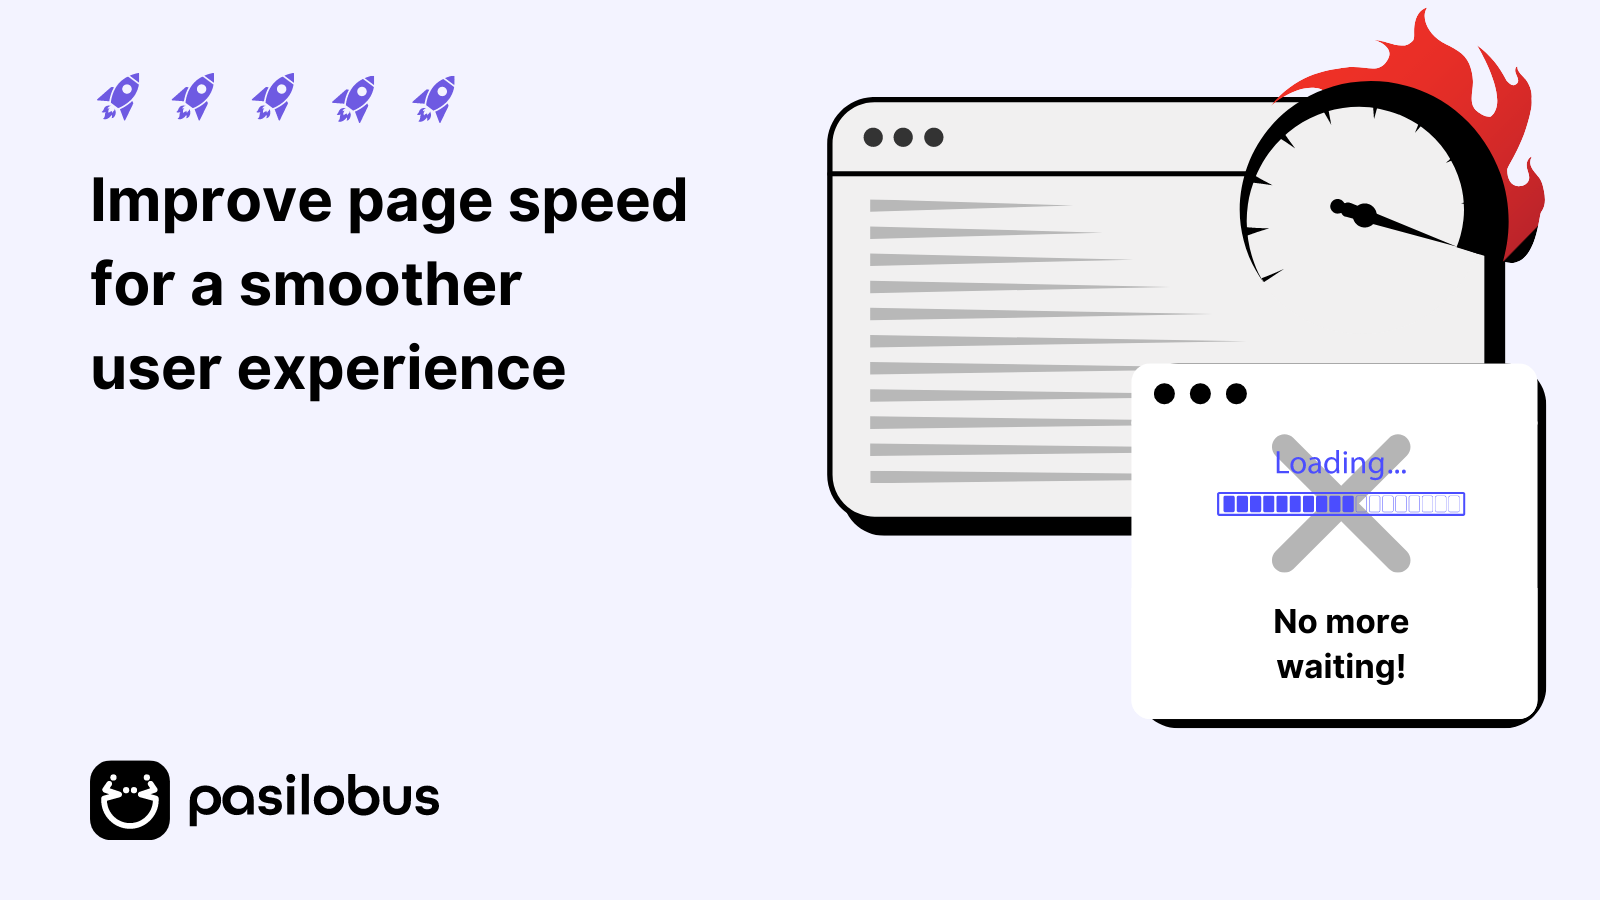 Improve page speed for a smoother user experience